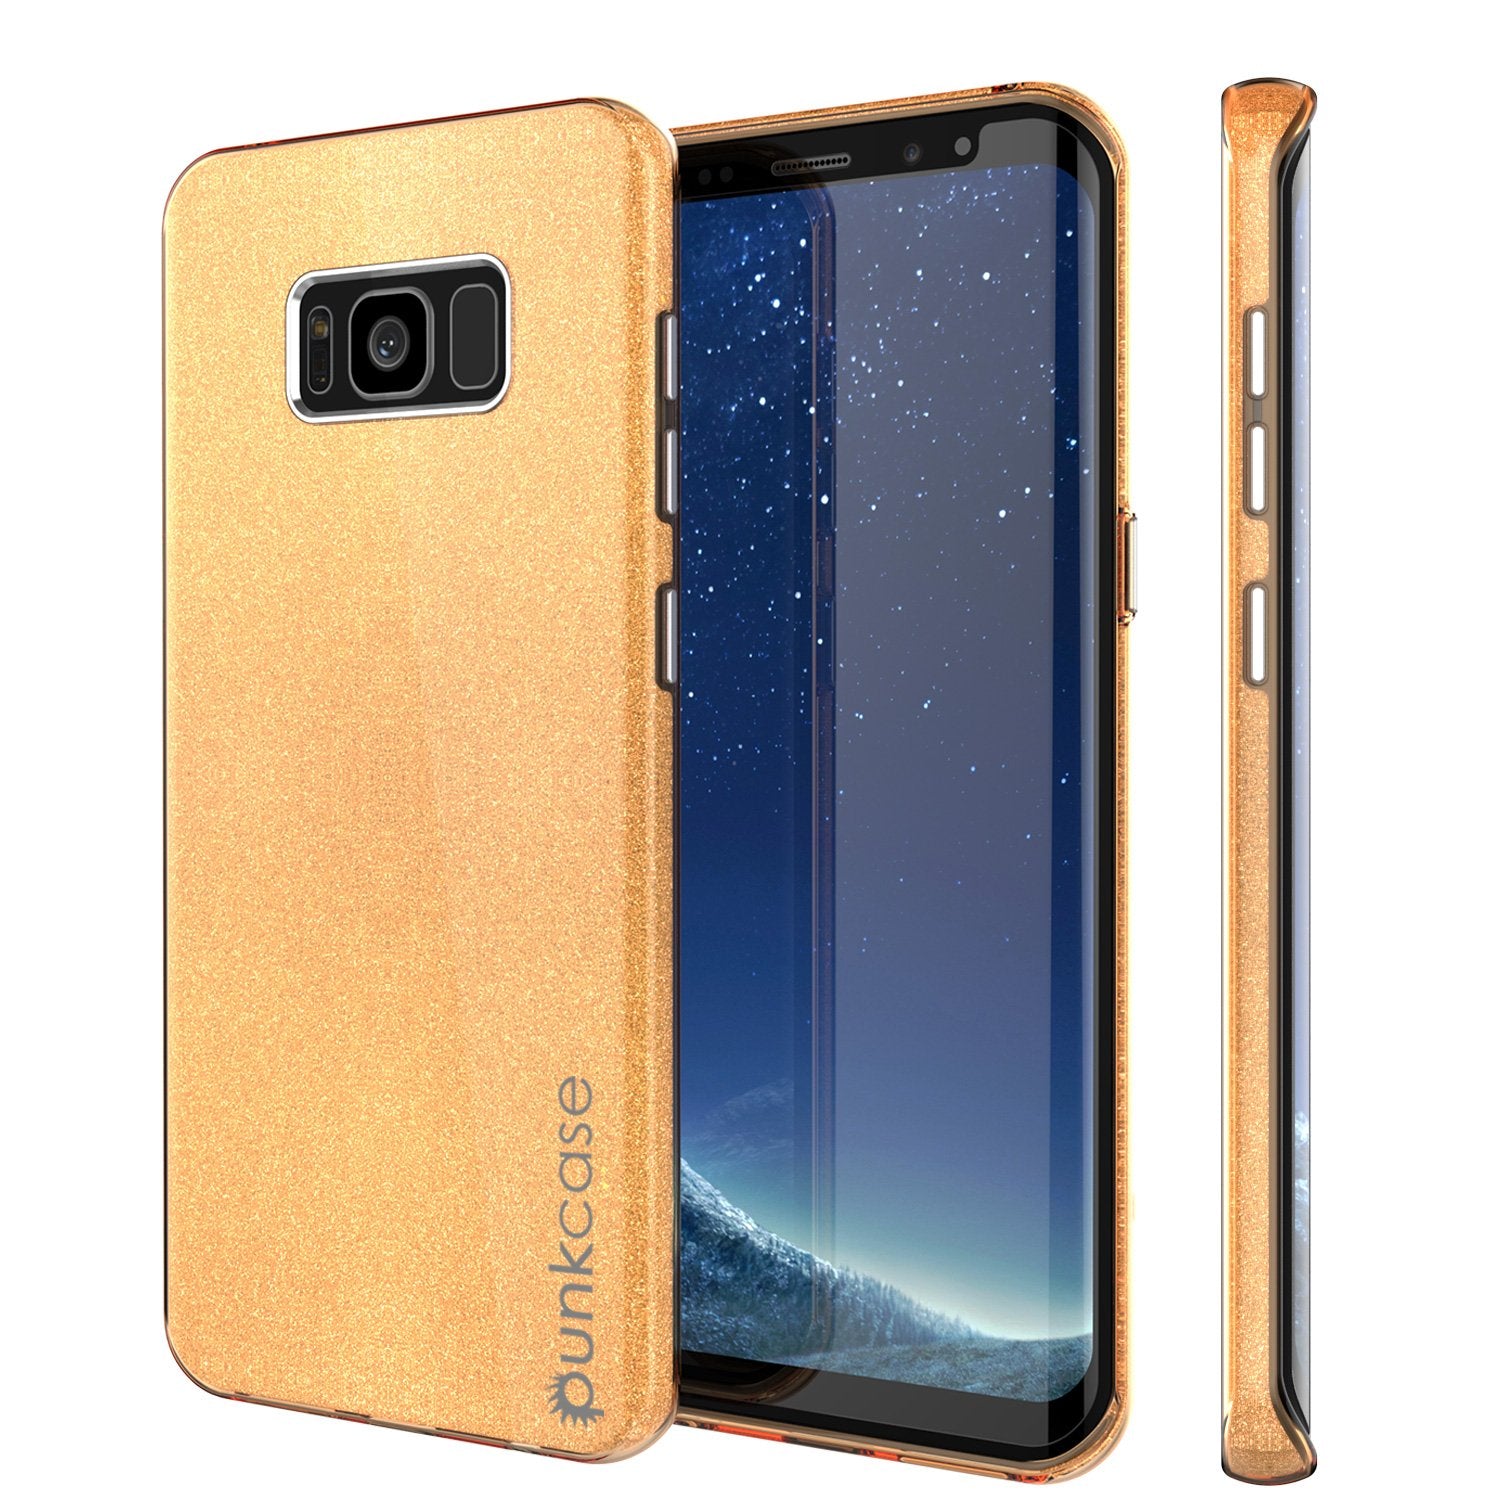 Galaxy S8 Case, Punkcase Galactic 2.0 Series Ultra Slim Protective Armor TPU Cover w/ PunkShield Screen Protector | Lifetime Exchange Warranty | Designed for Samsung Galaxy S8 [Gold]